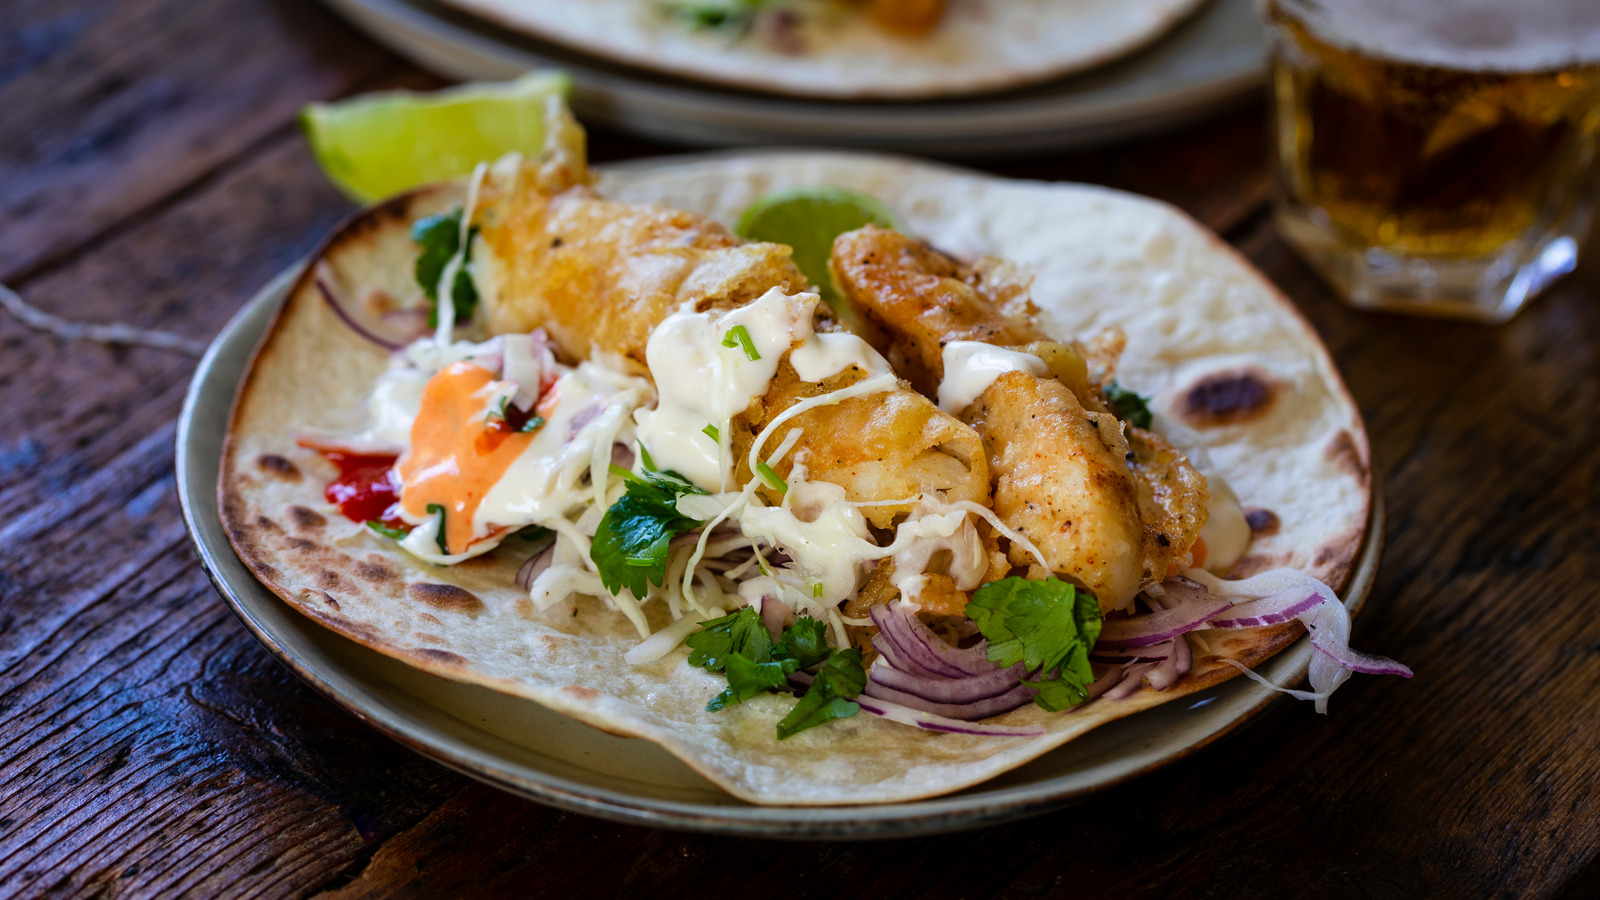 What's A Typical Sauce To Serve With Fish Tacos?